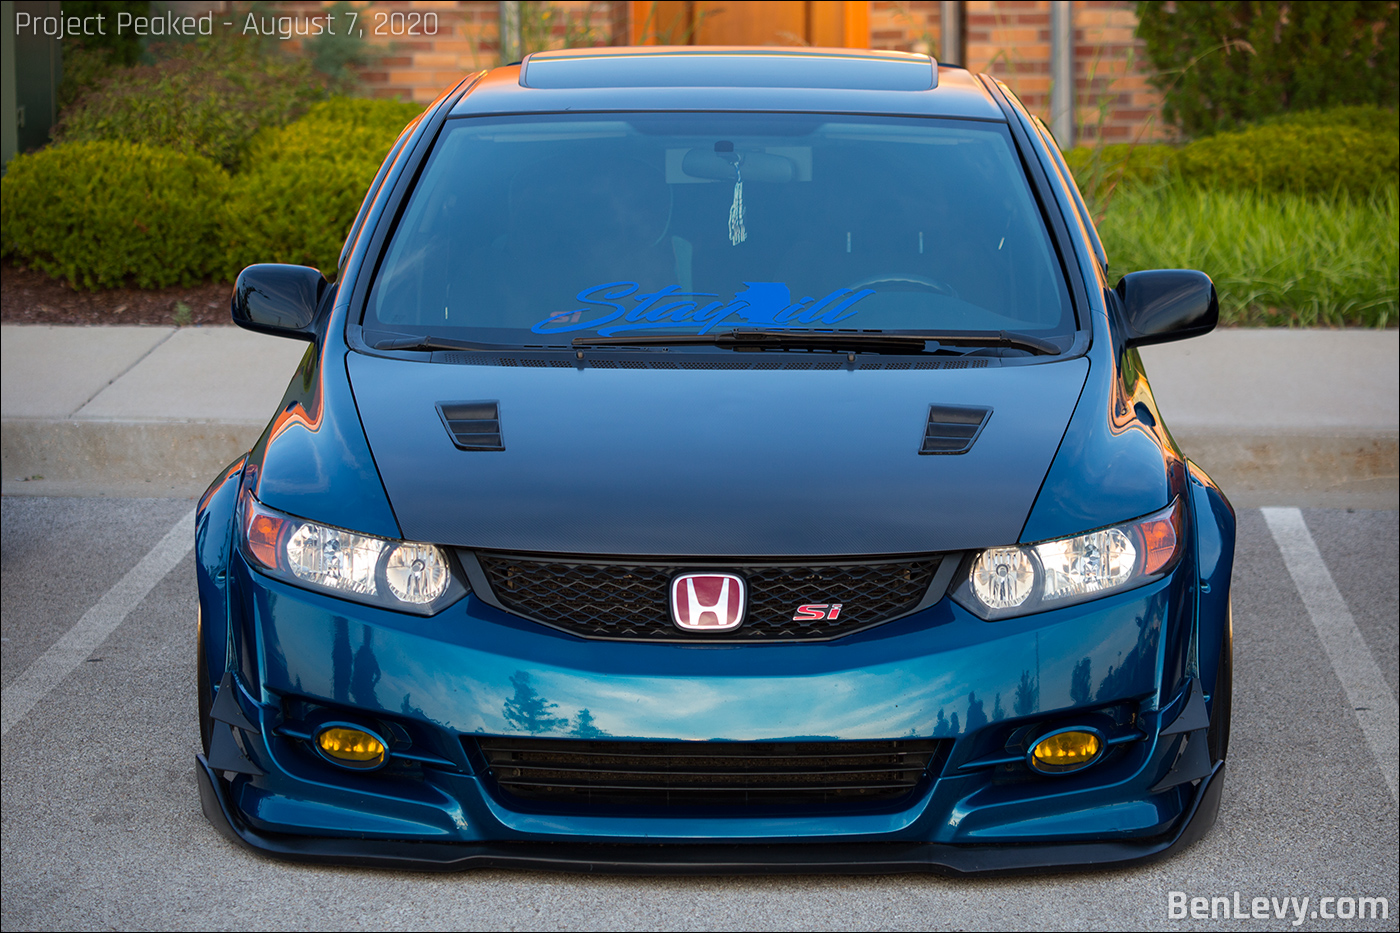 Front shot of Blue Honda Civic Si coupe